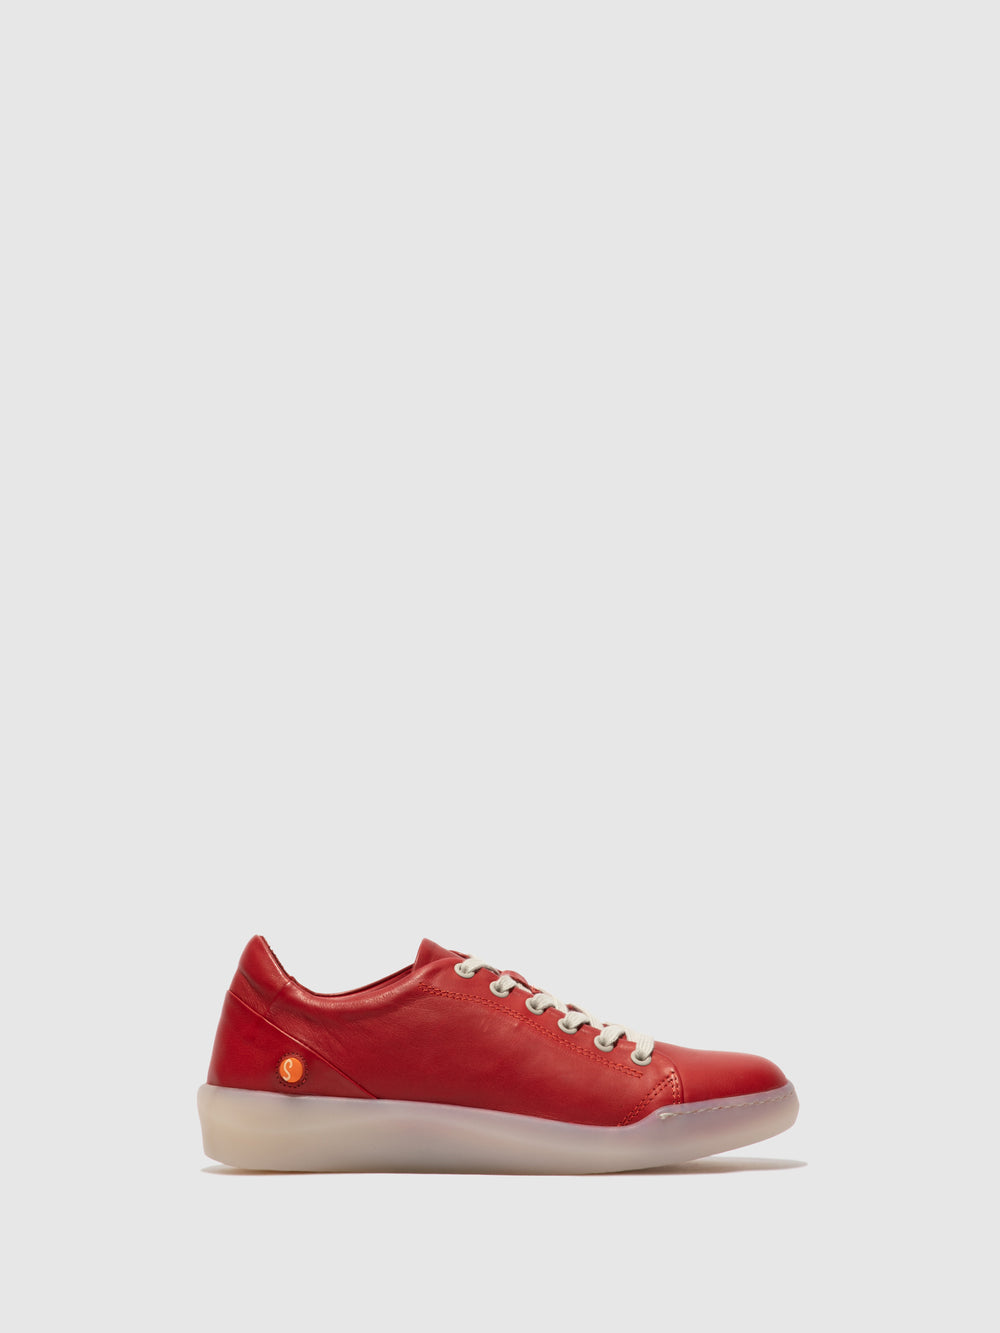 Lace-up Trainers BAUKII579SOF SUPPLE CHERRY RED